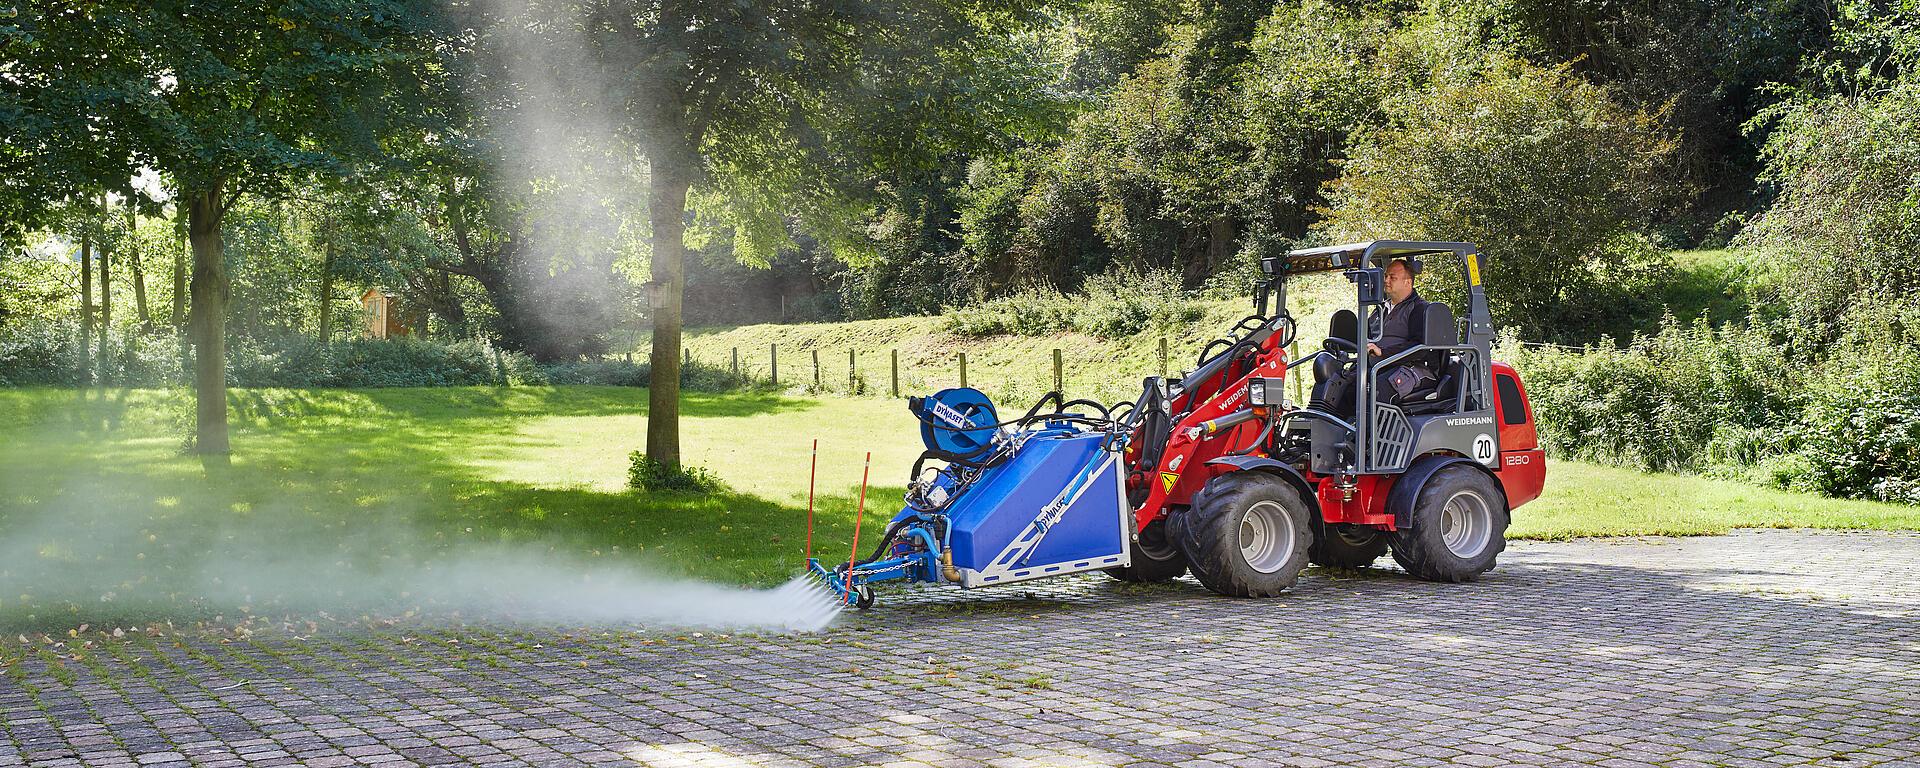 Weidemann Hoftrac/farm loader 1280 canopy with high-pressure cleaner in action